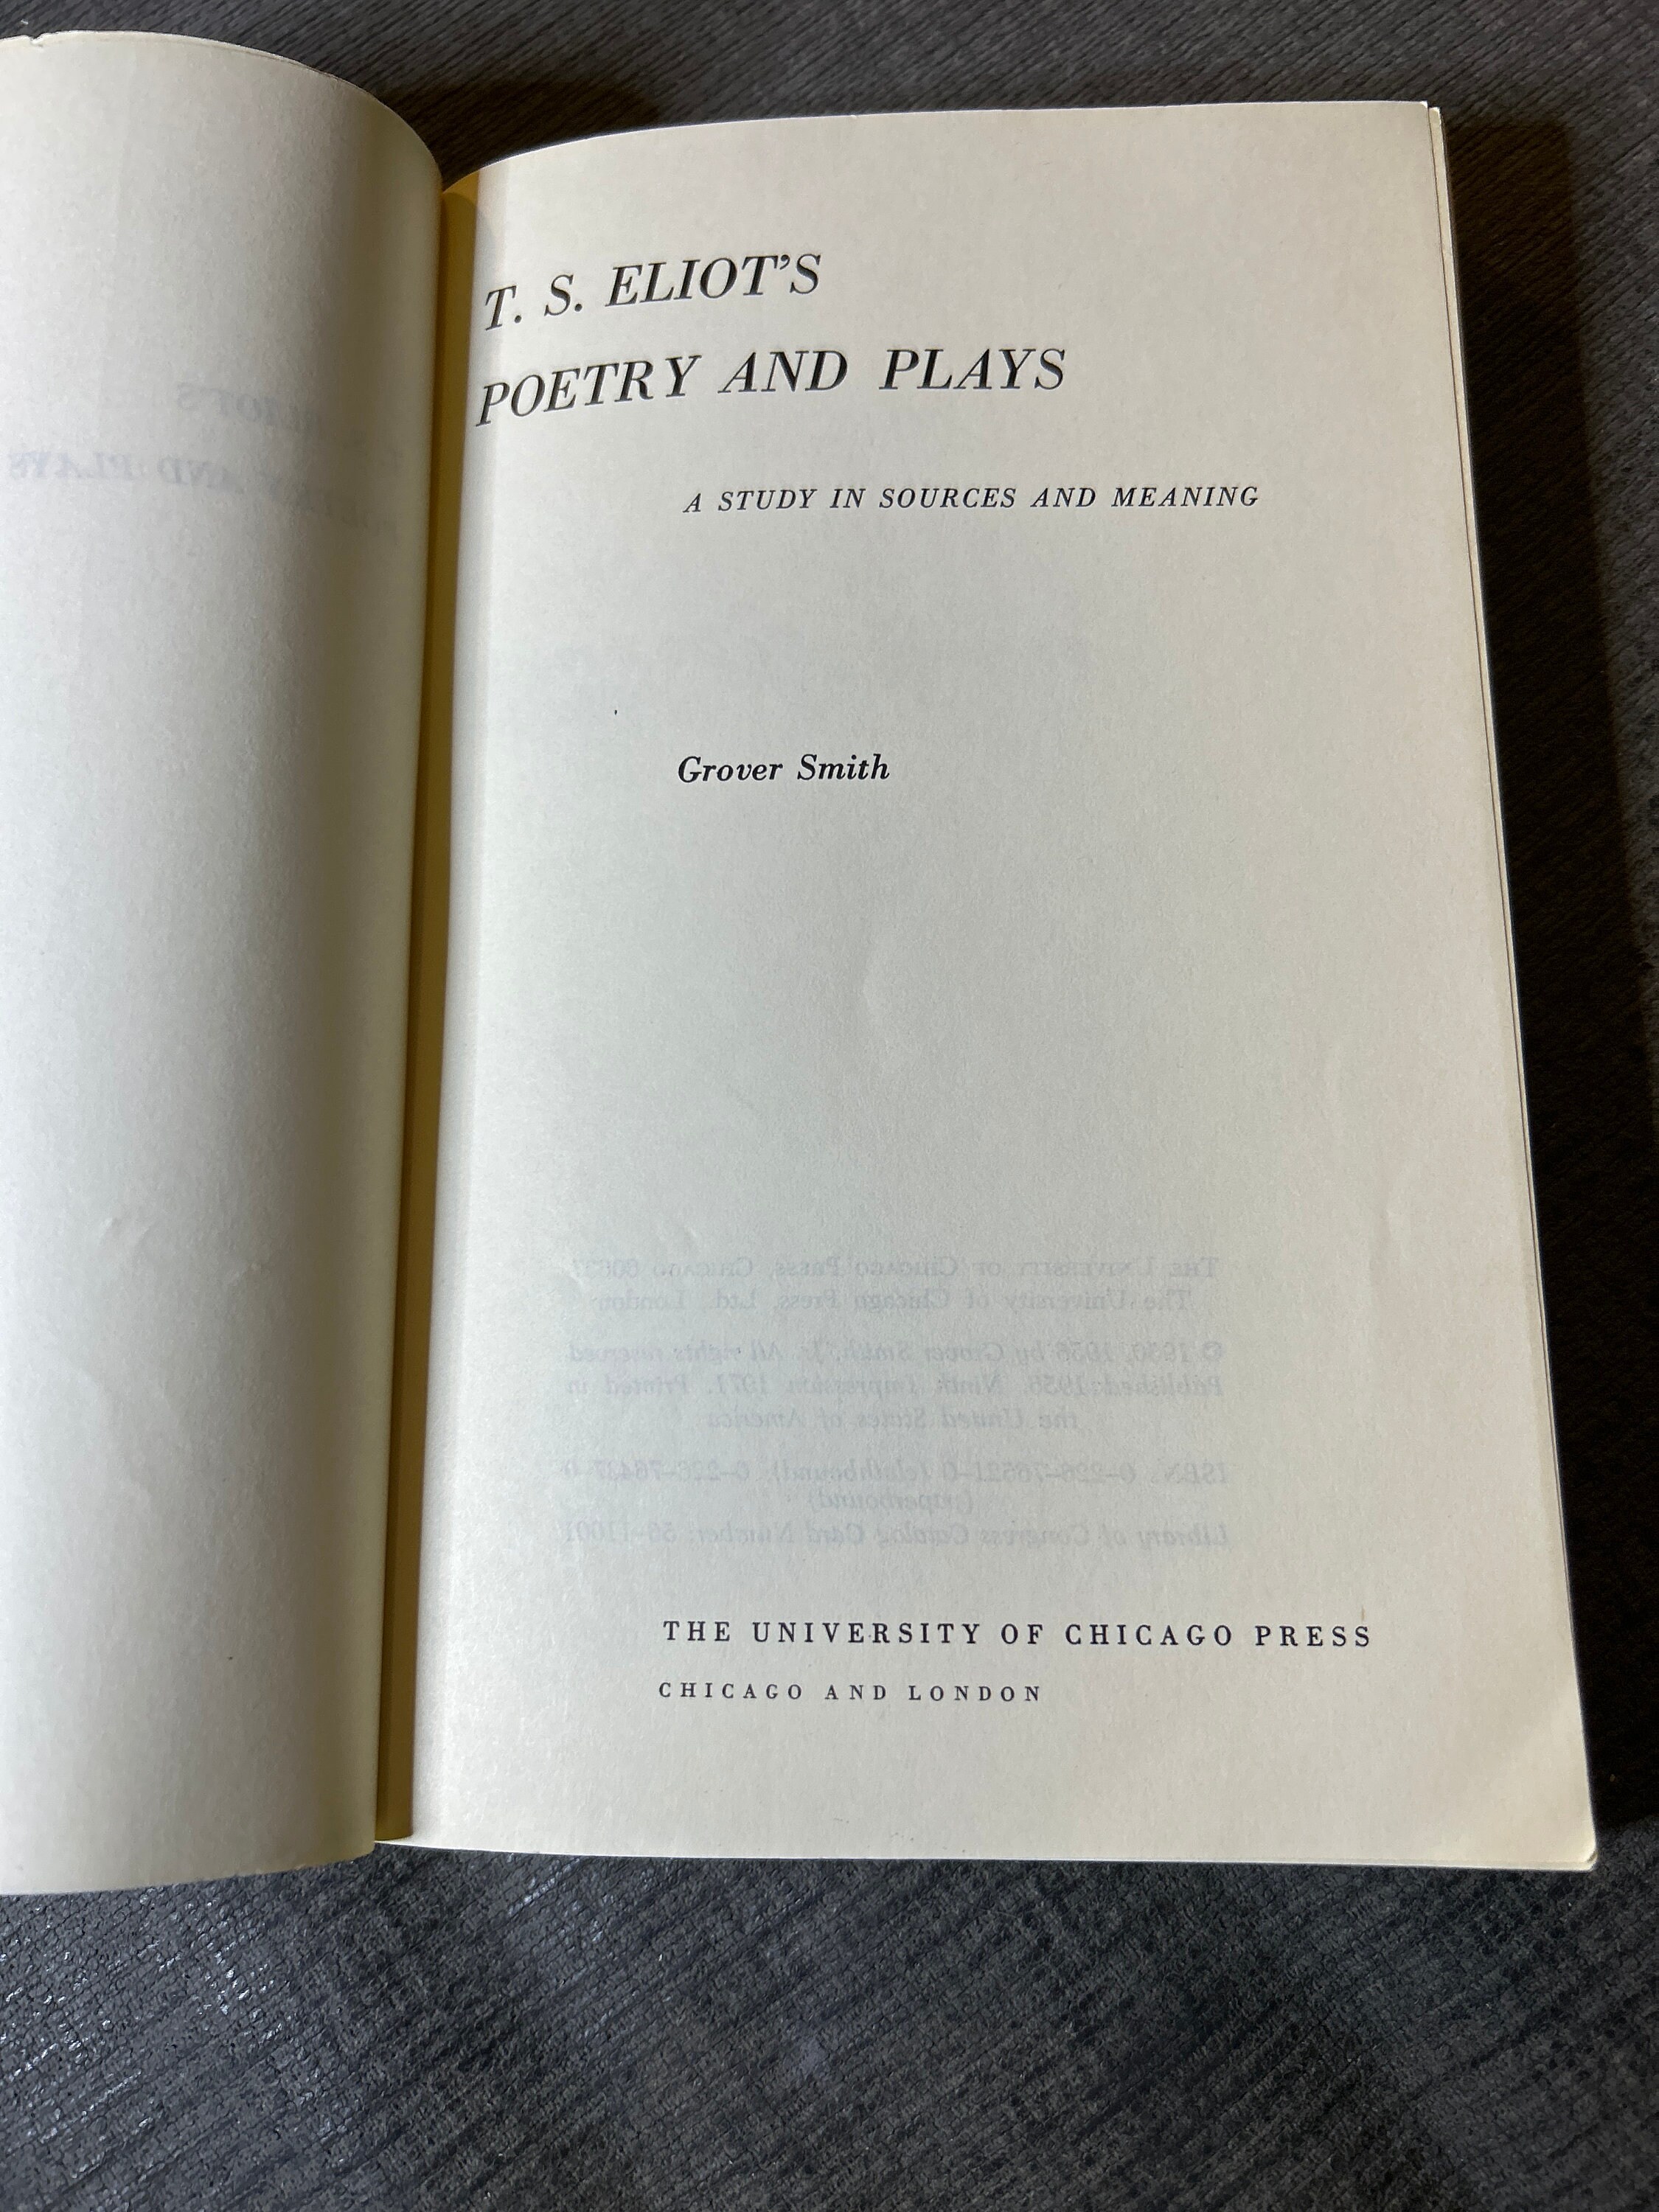 T.S. Eliot's Poetry and Plays. A Study in Sources and Meaning by